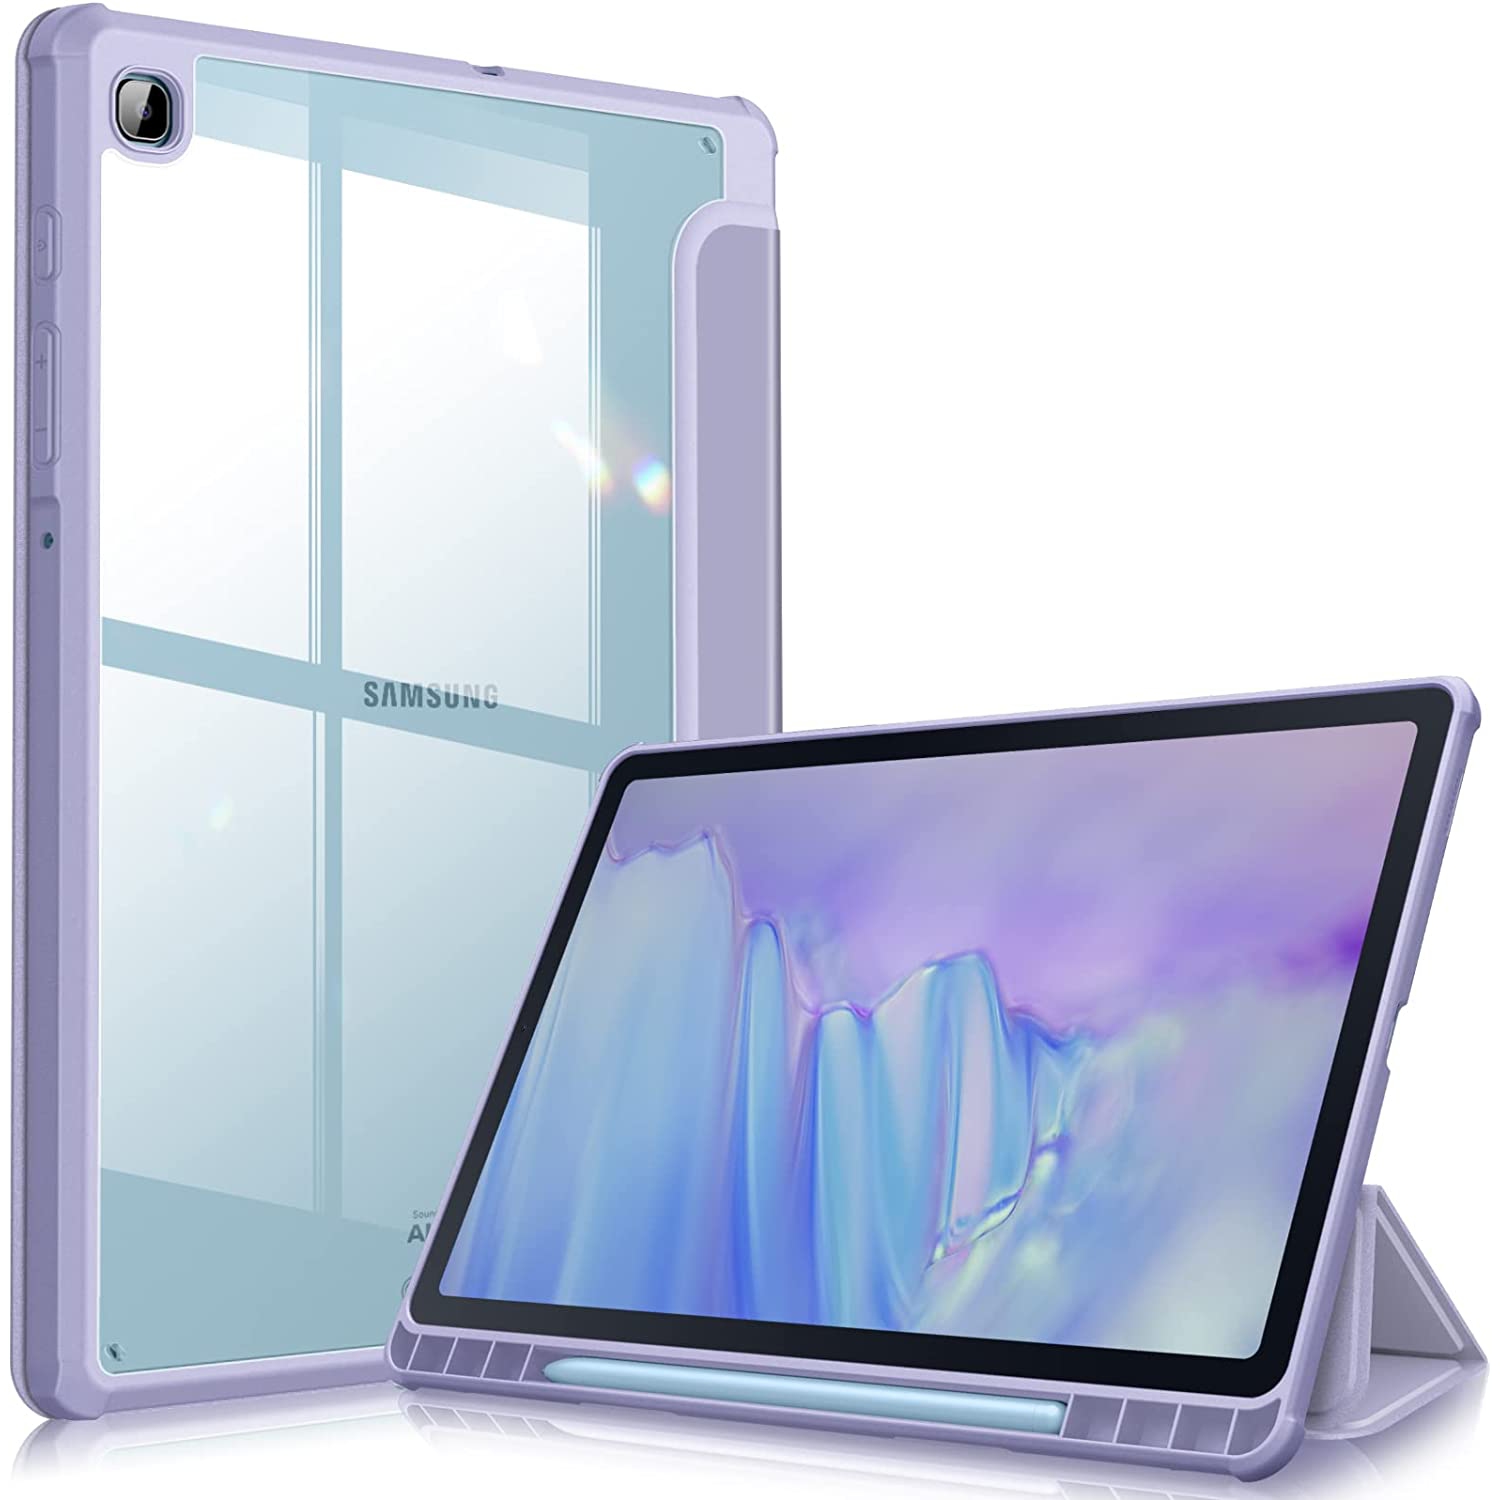 F Hybrid Slim Case for Samsung Galaxy Tab S6 Lite 10.4 inch 2022/2020 Model (SM-P610/P613/P615/P619) with S Pen Holder, Shockproof Cover with Clear Transparent Back Shell (Lilac Pu